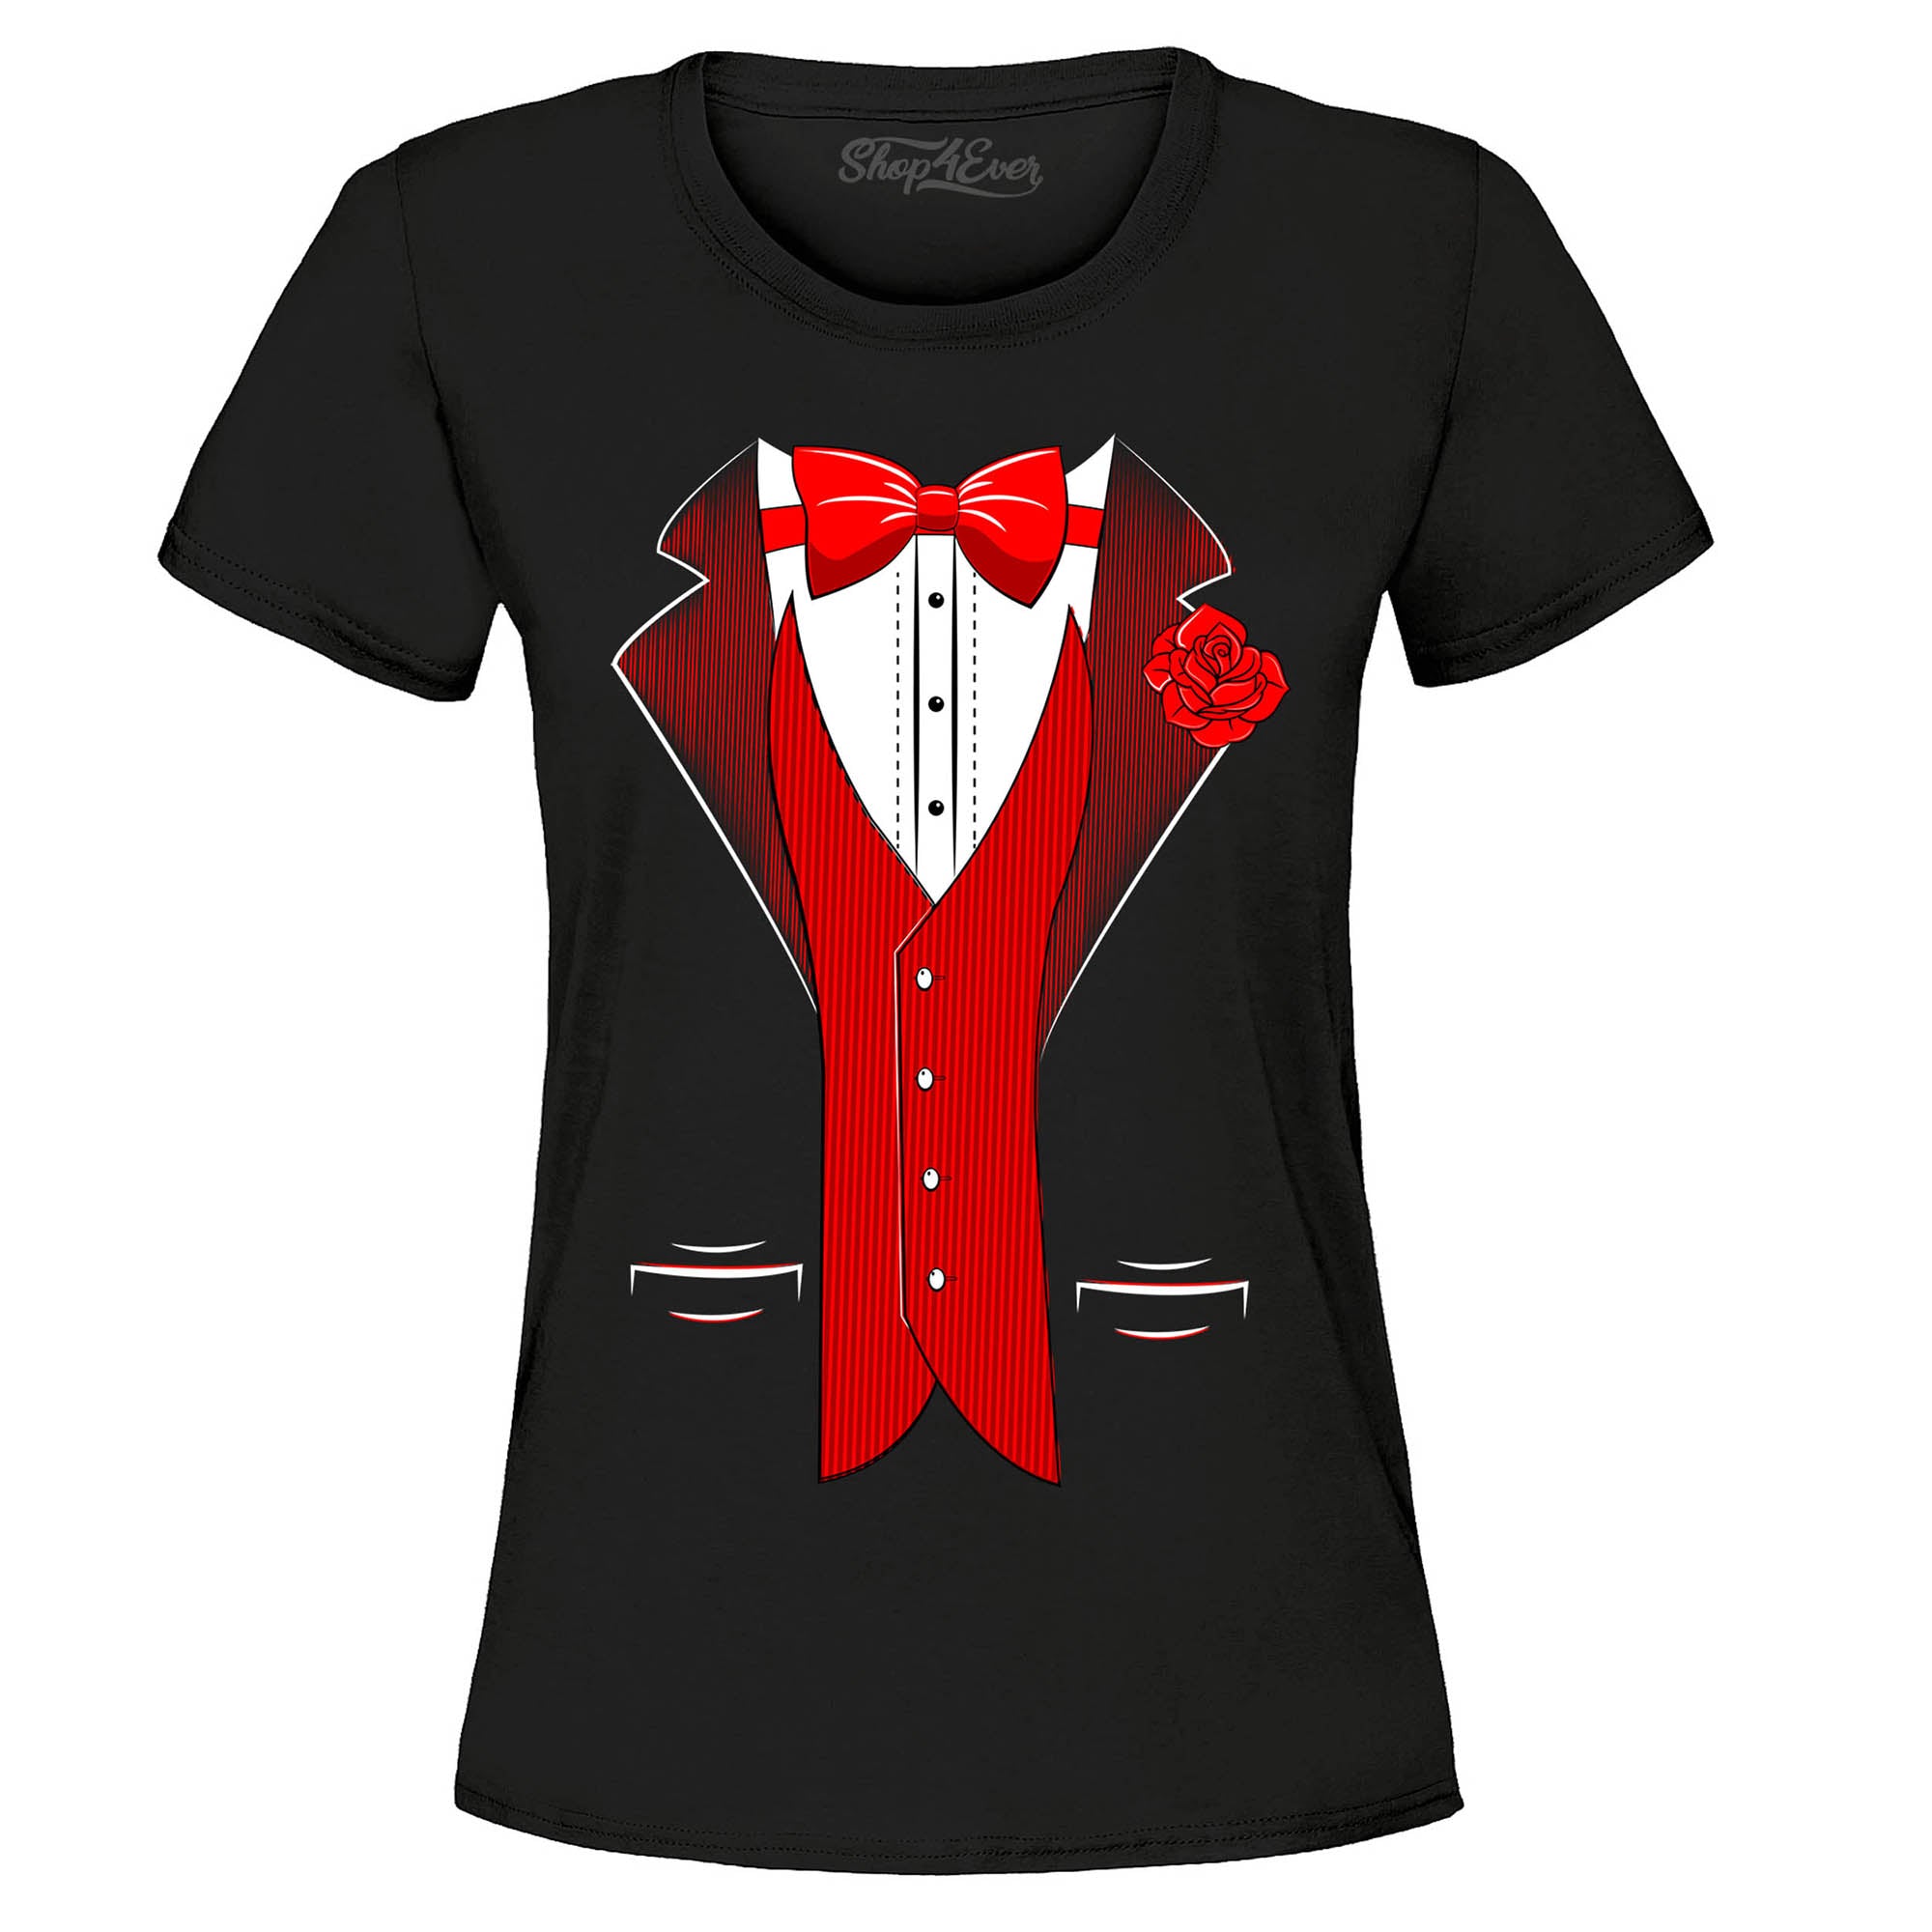 Classic Tuxedo with Red Rose Women's T-Shirt Party Costume Shirts